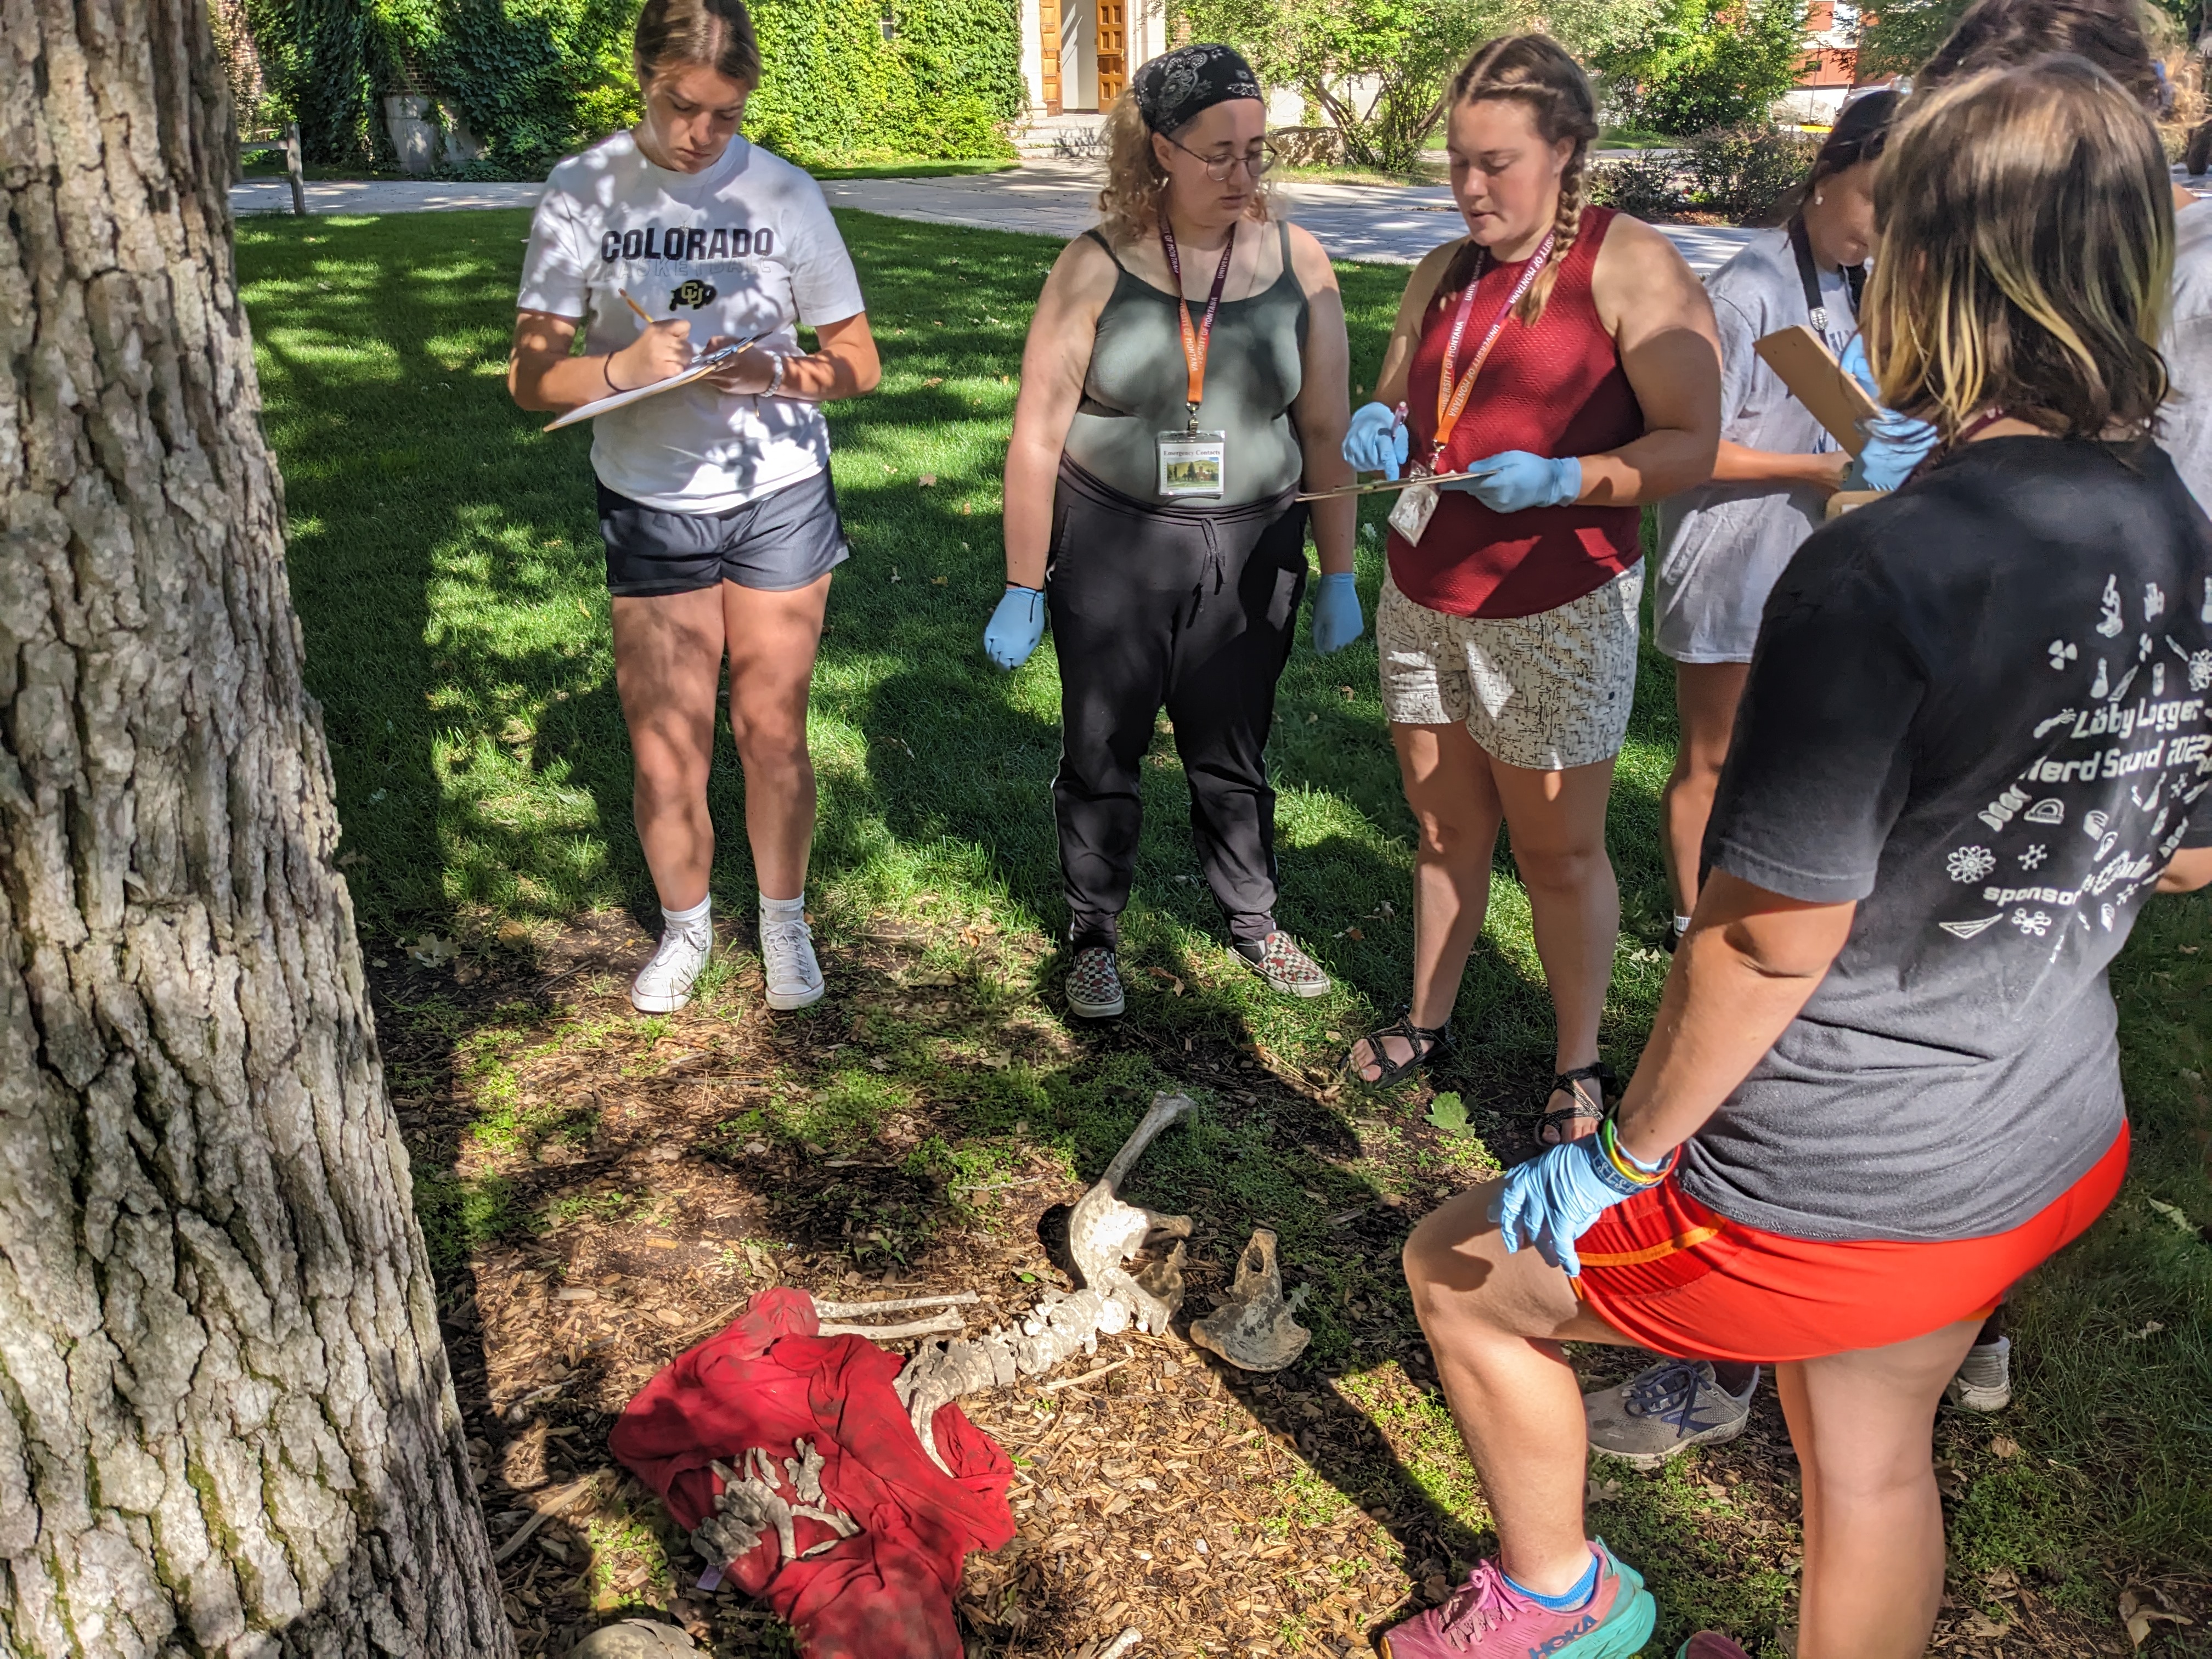 Group of students observe "mock remains" on ground outside